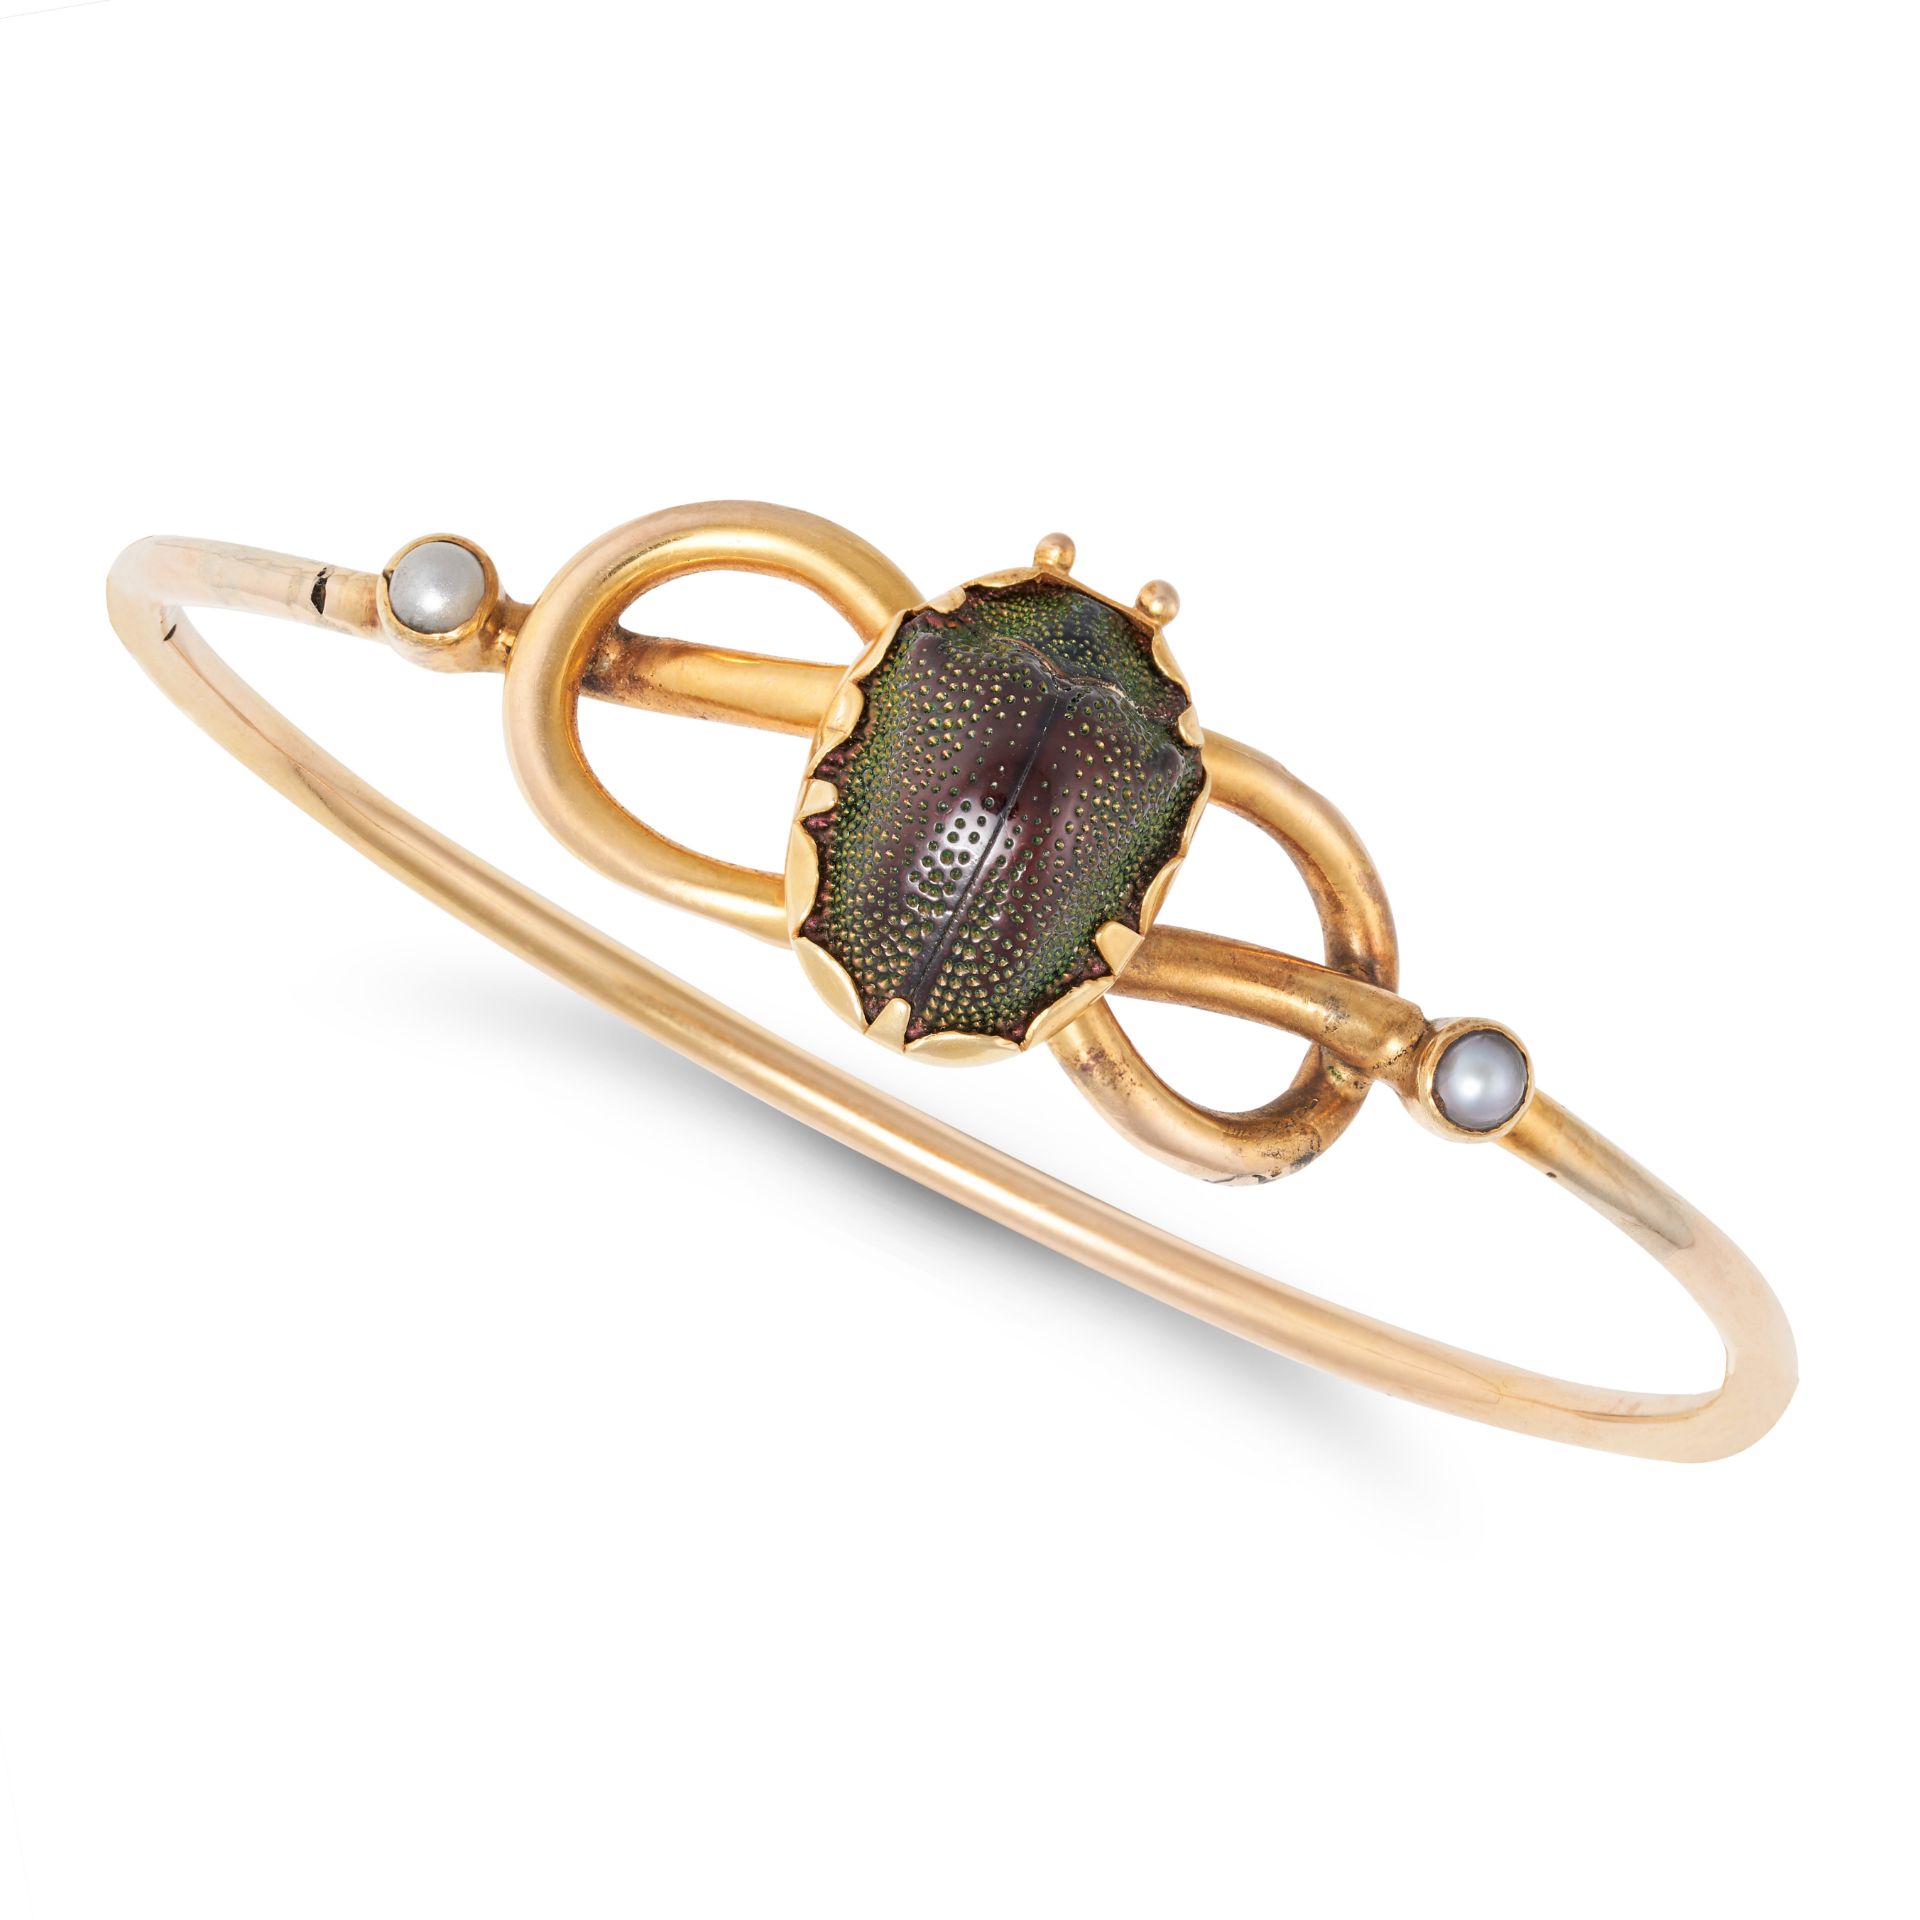 NO RESERVE - A PEARL AND SCARAB BEETLE BANGLE in yellow gold, the hinged bangle in a knotted desi...